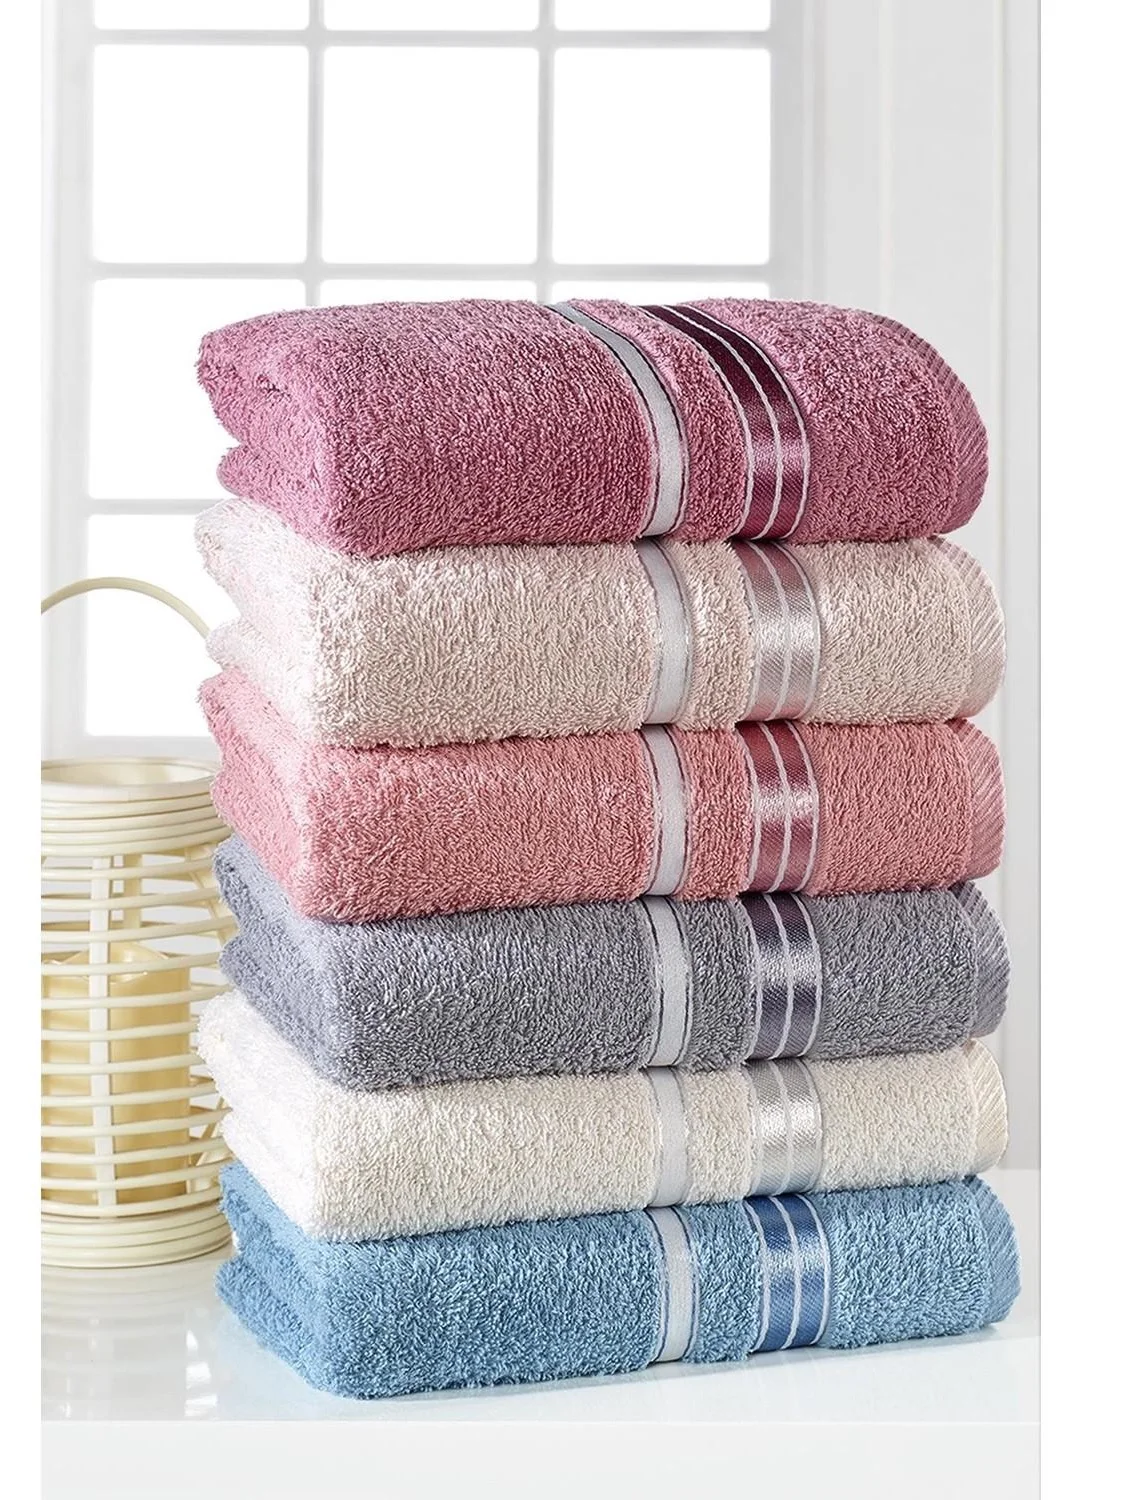 

Super Soft %100 Cotton Head Hand Face Towel Set Turkish High Quality Quick Dry Great Absorbent Colorful 6 Pcs 50x85 cm